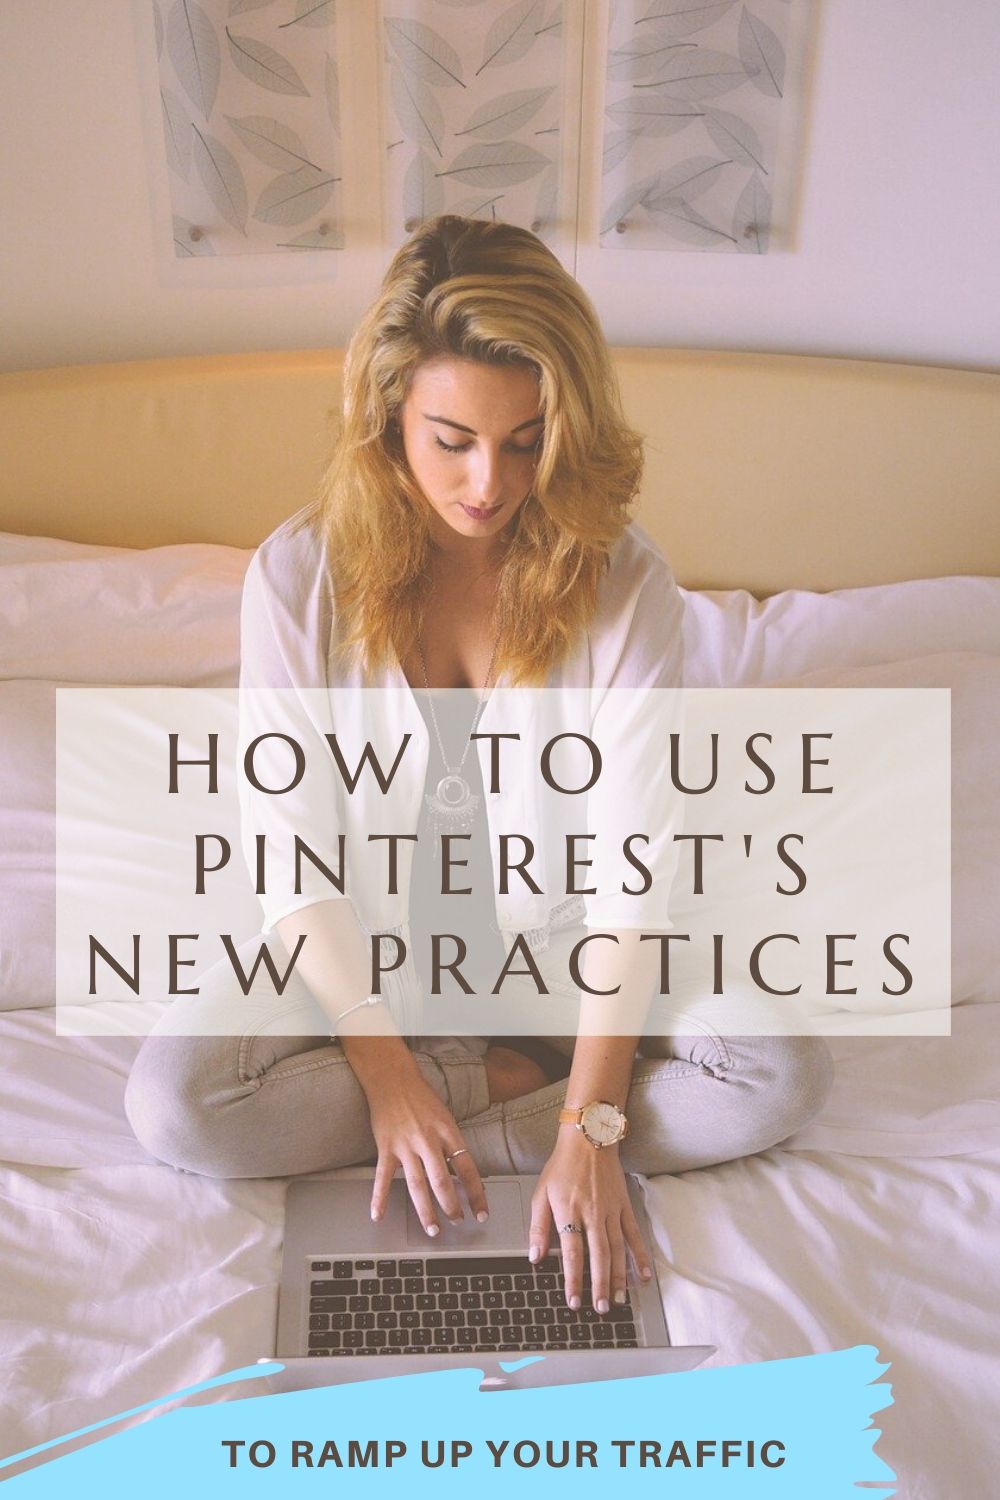 How to Use Pinterest's New Practices to Ramp Up Your Traffic